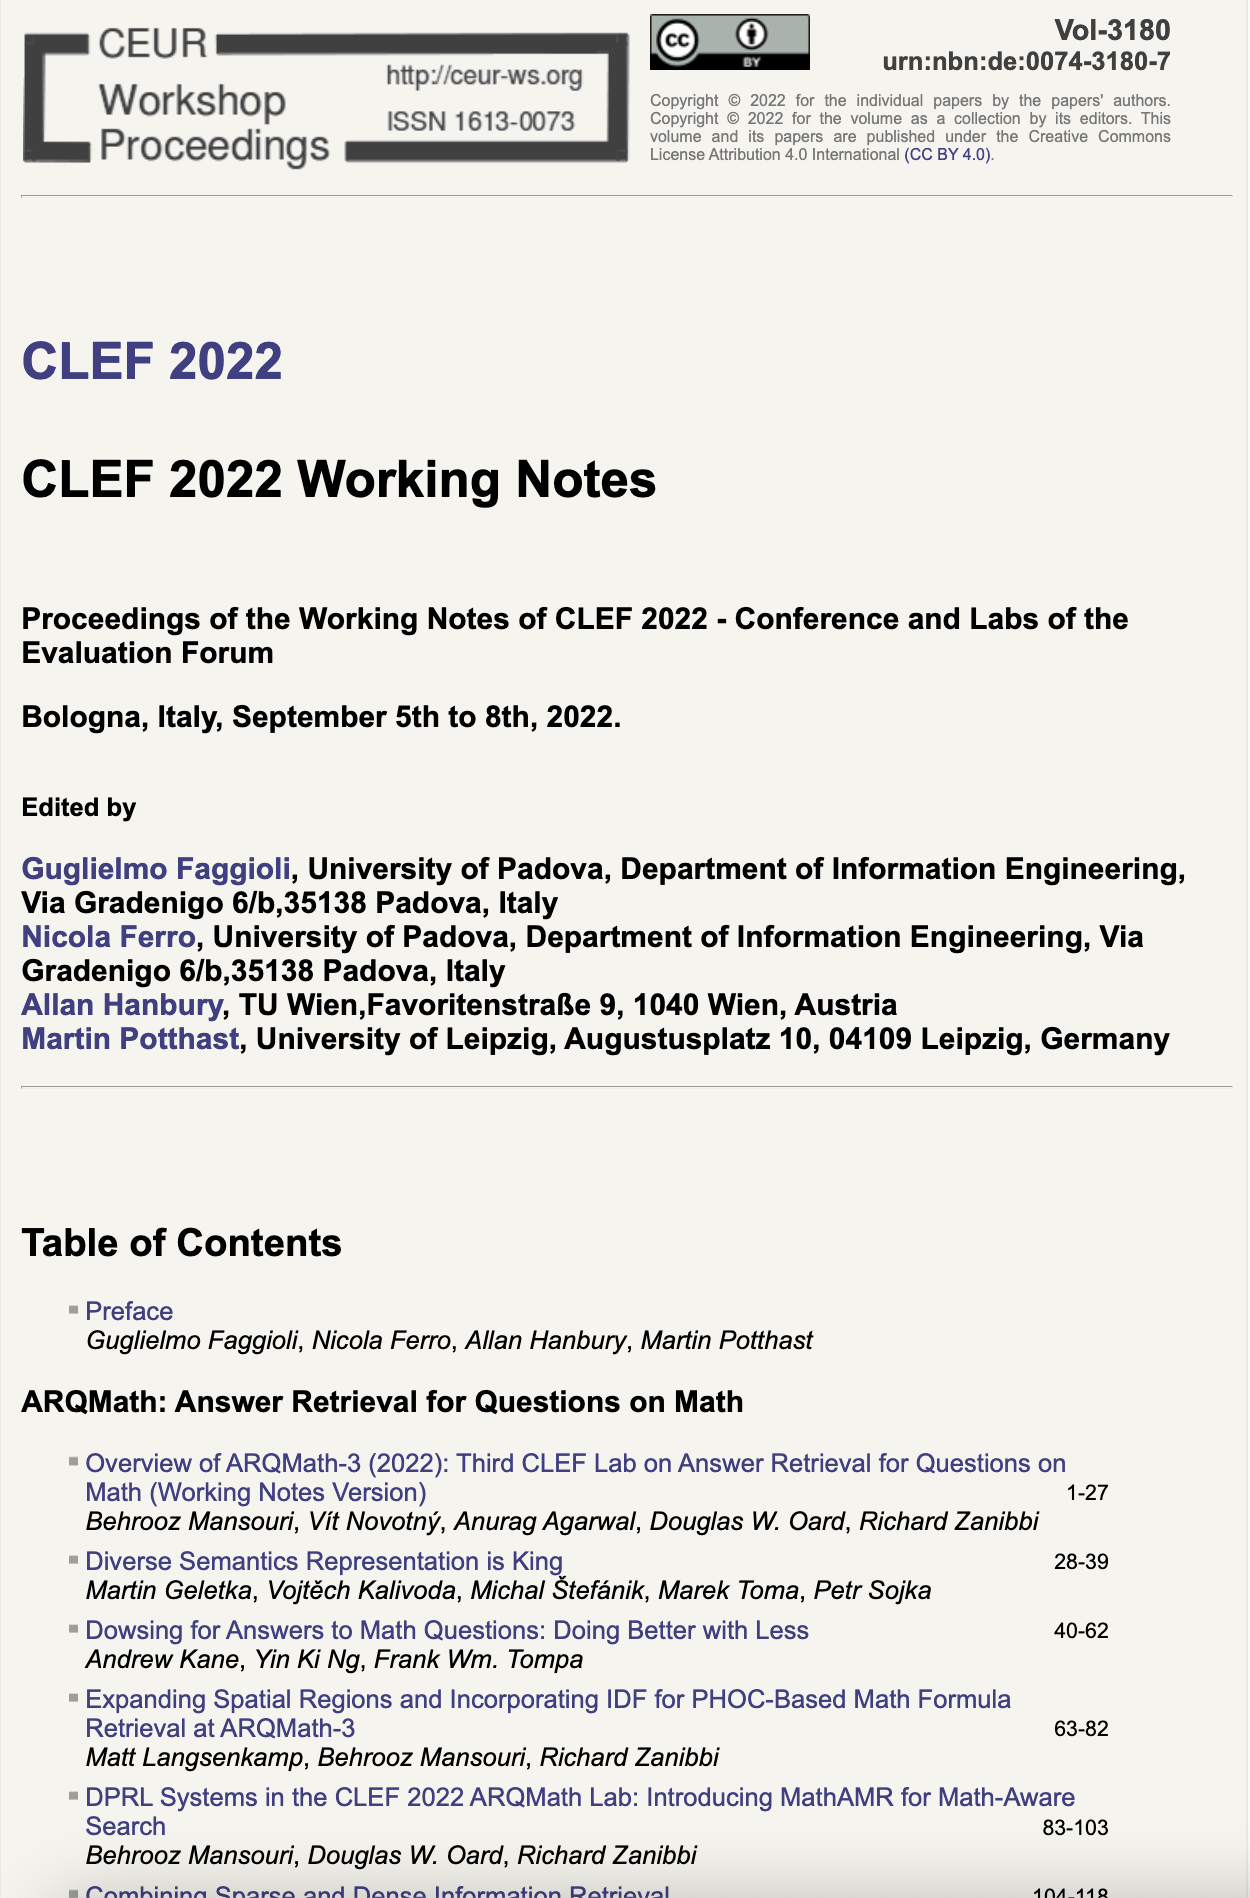 CLEF 2022 CEUR-WS Working Notes page